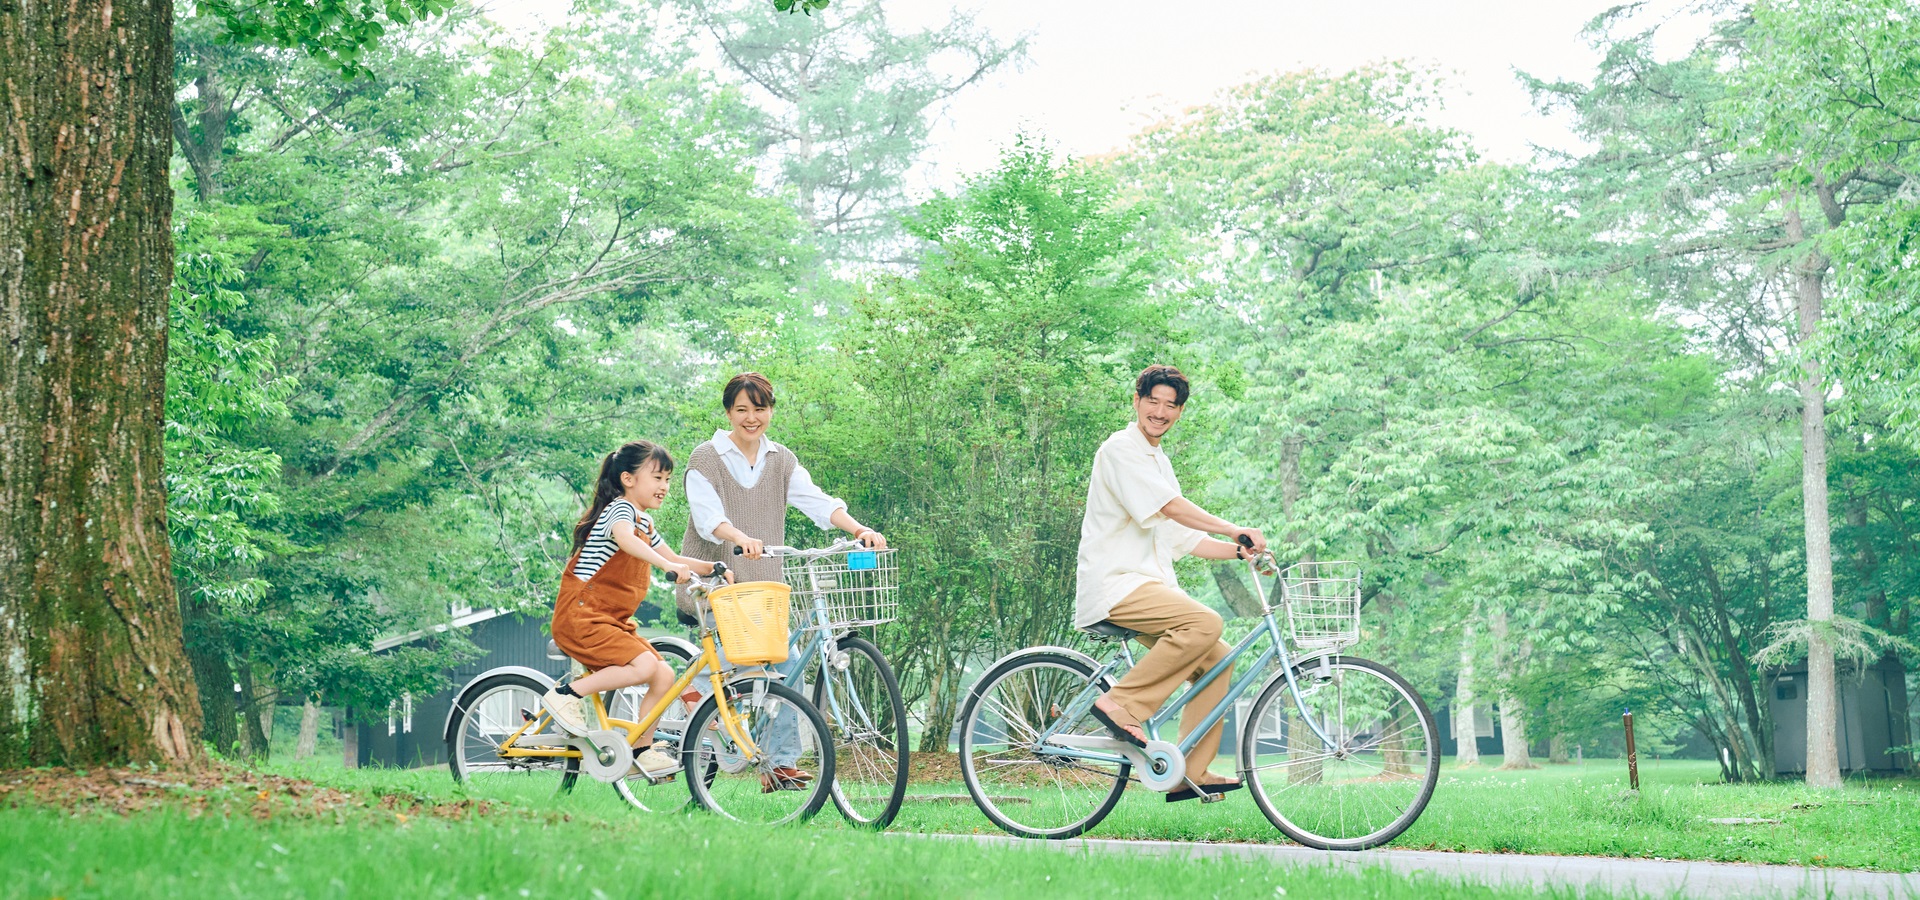 Let’s sightseeing by bicycle!